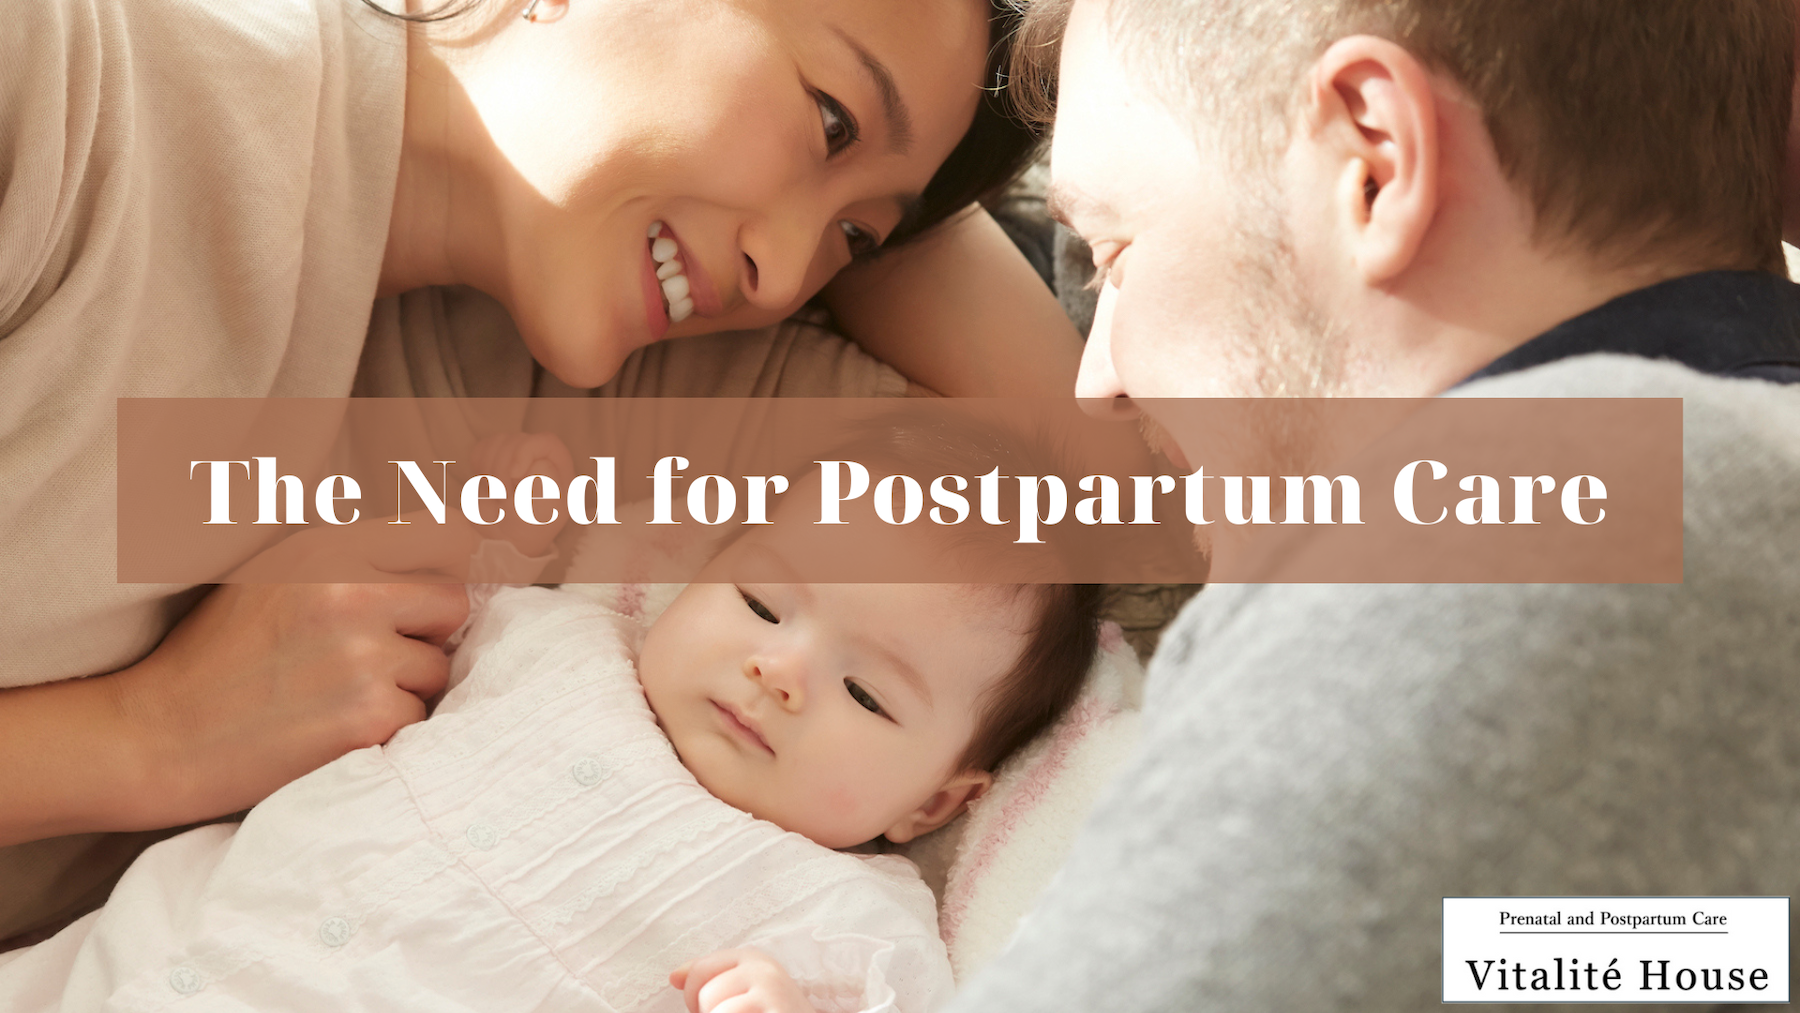 The Need for Postpartum Care - JapanLivingGuide.net - Living Guide